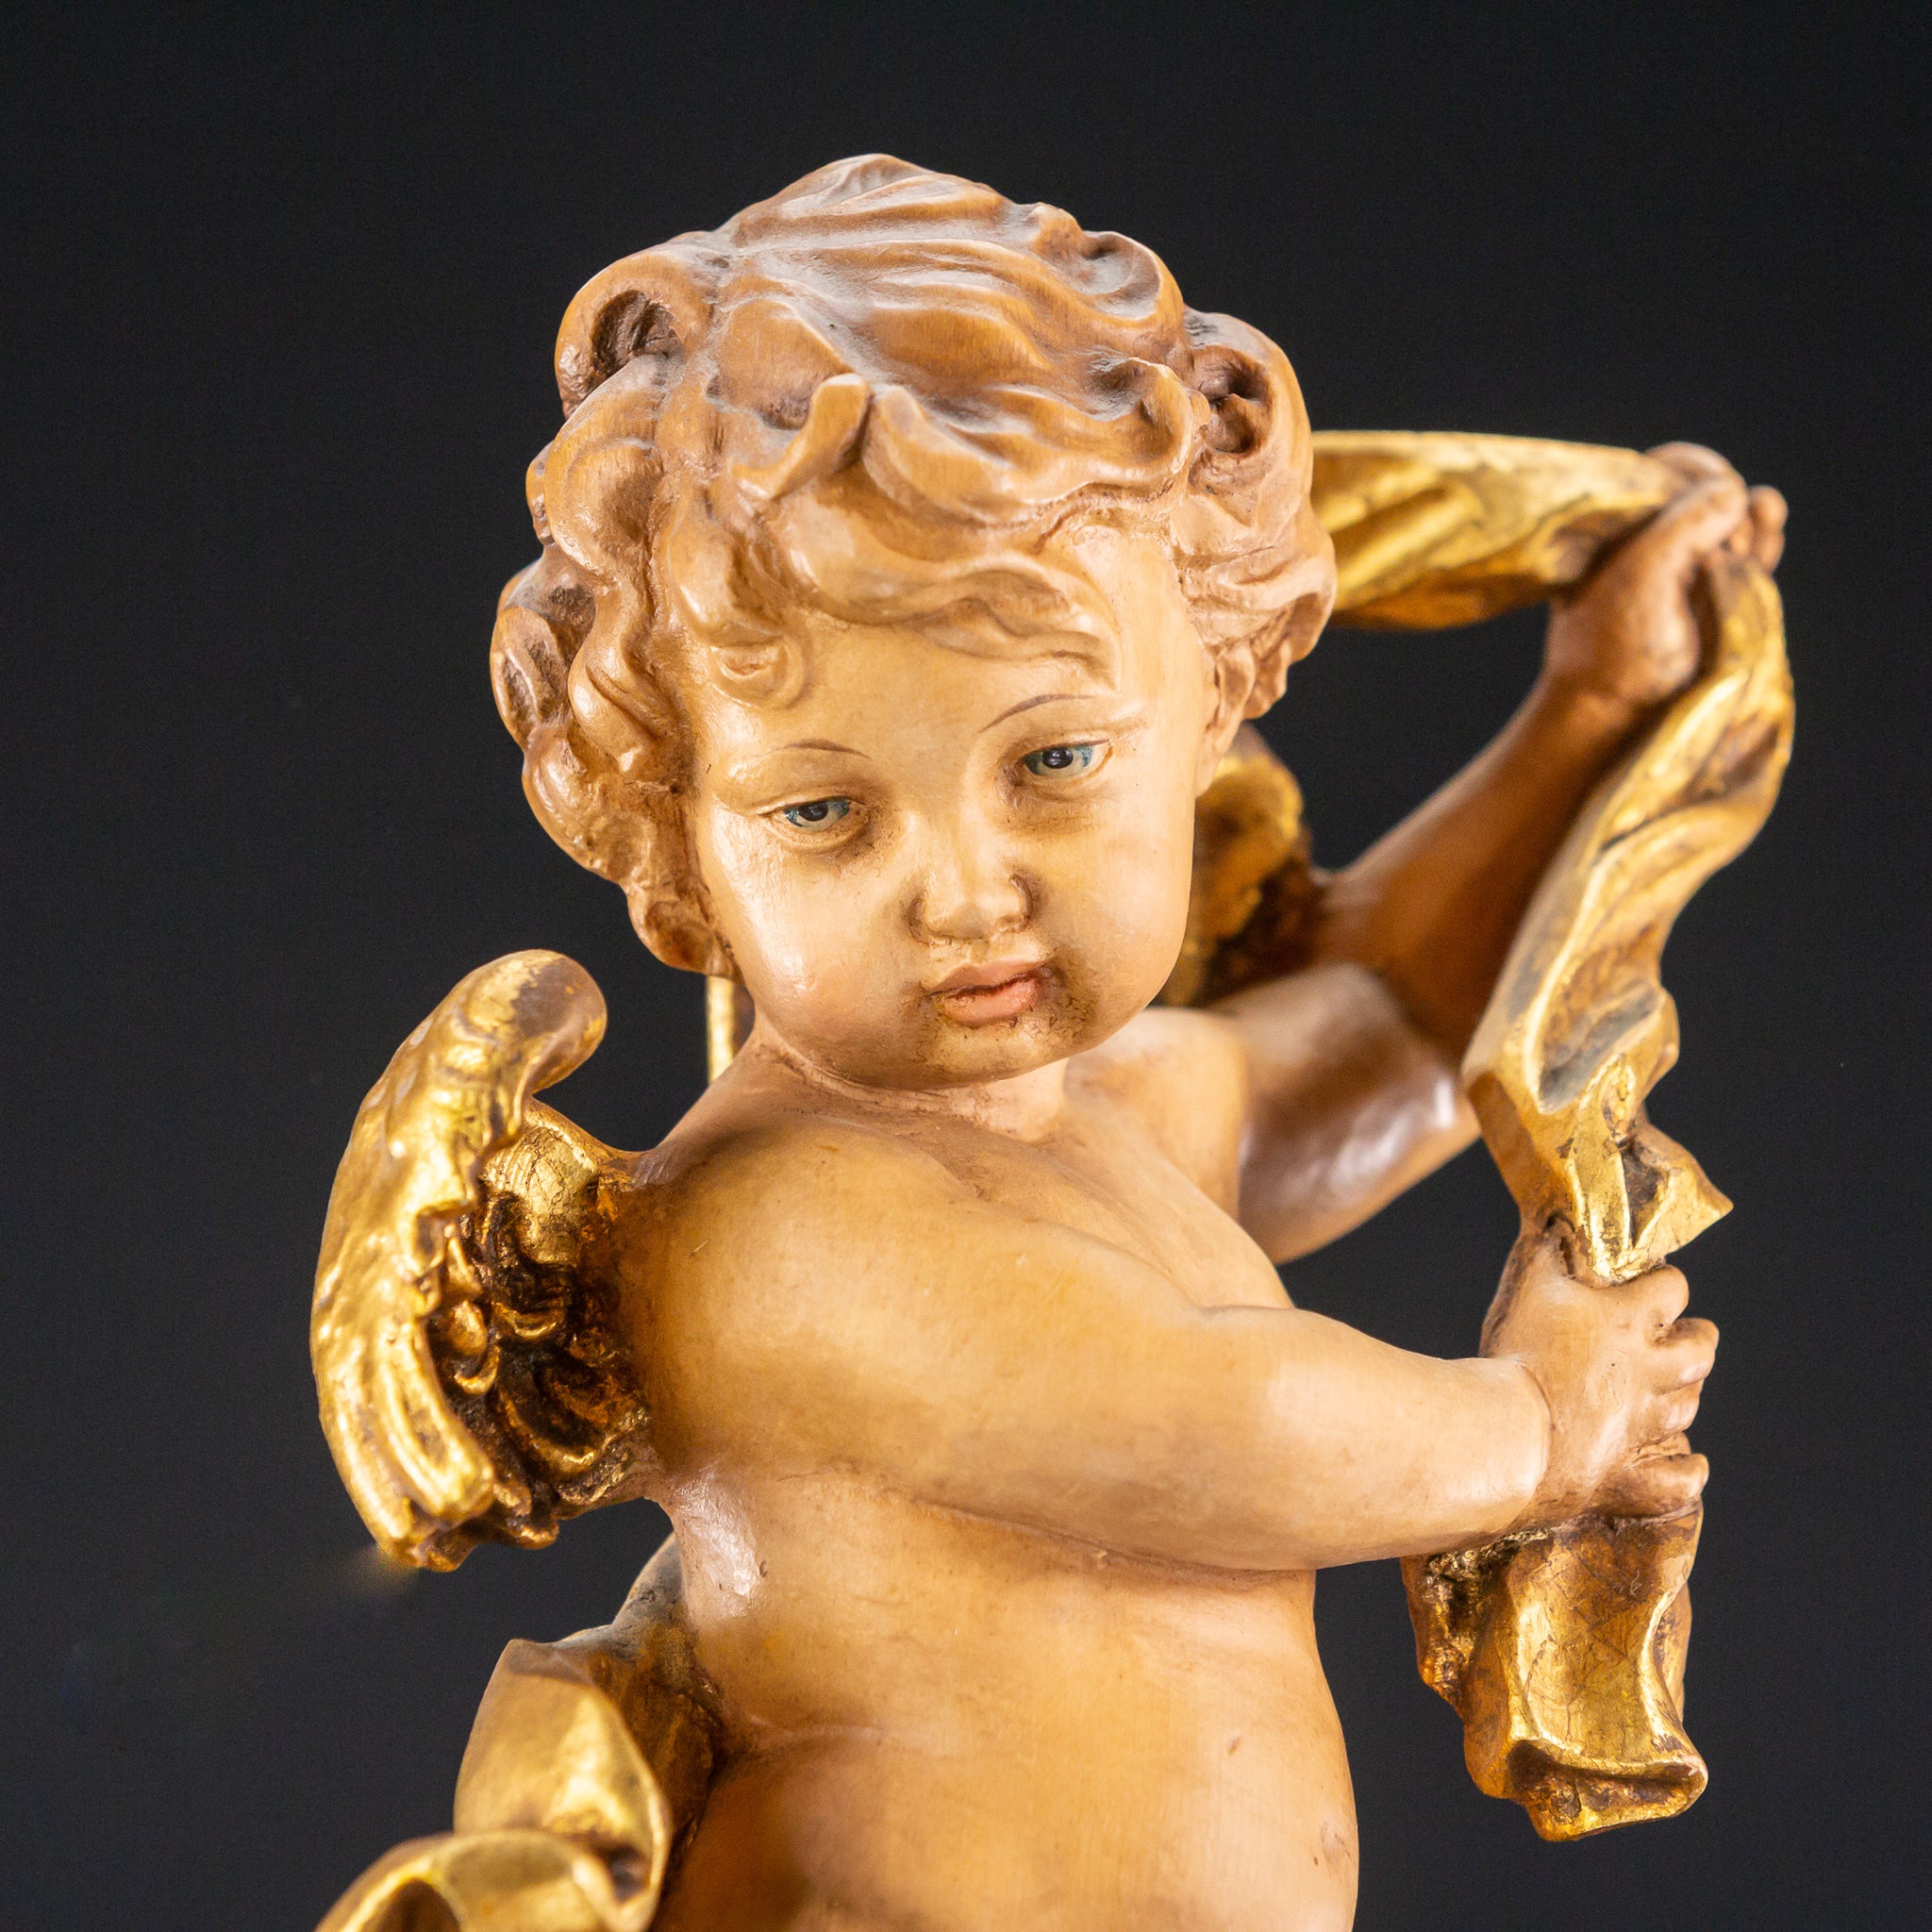 Angel Sculpture | Wood Carving Statue 10.2"